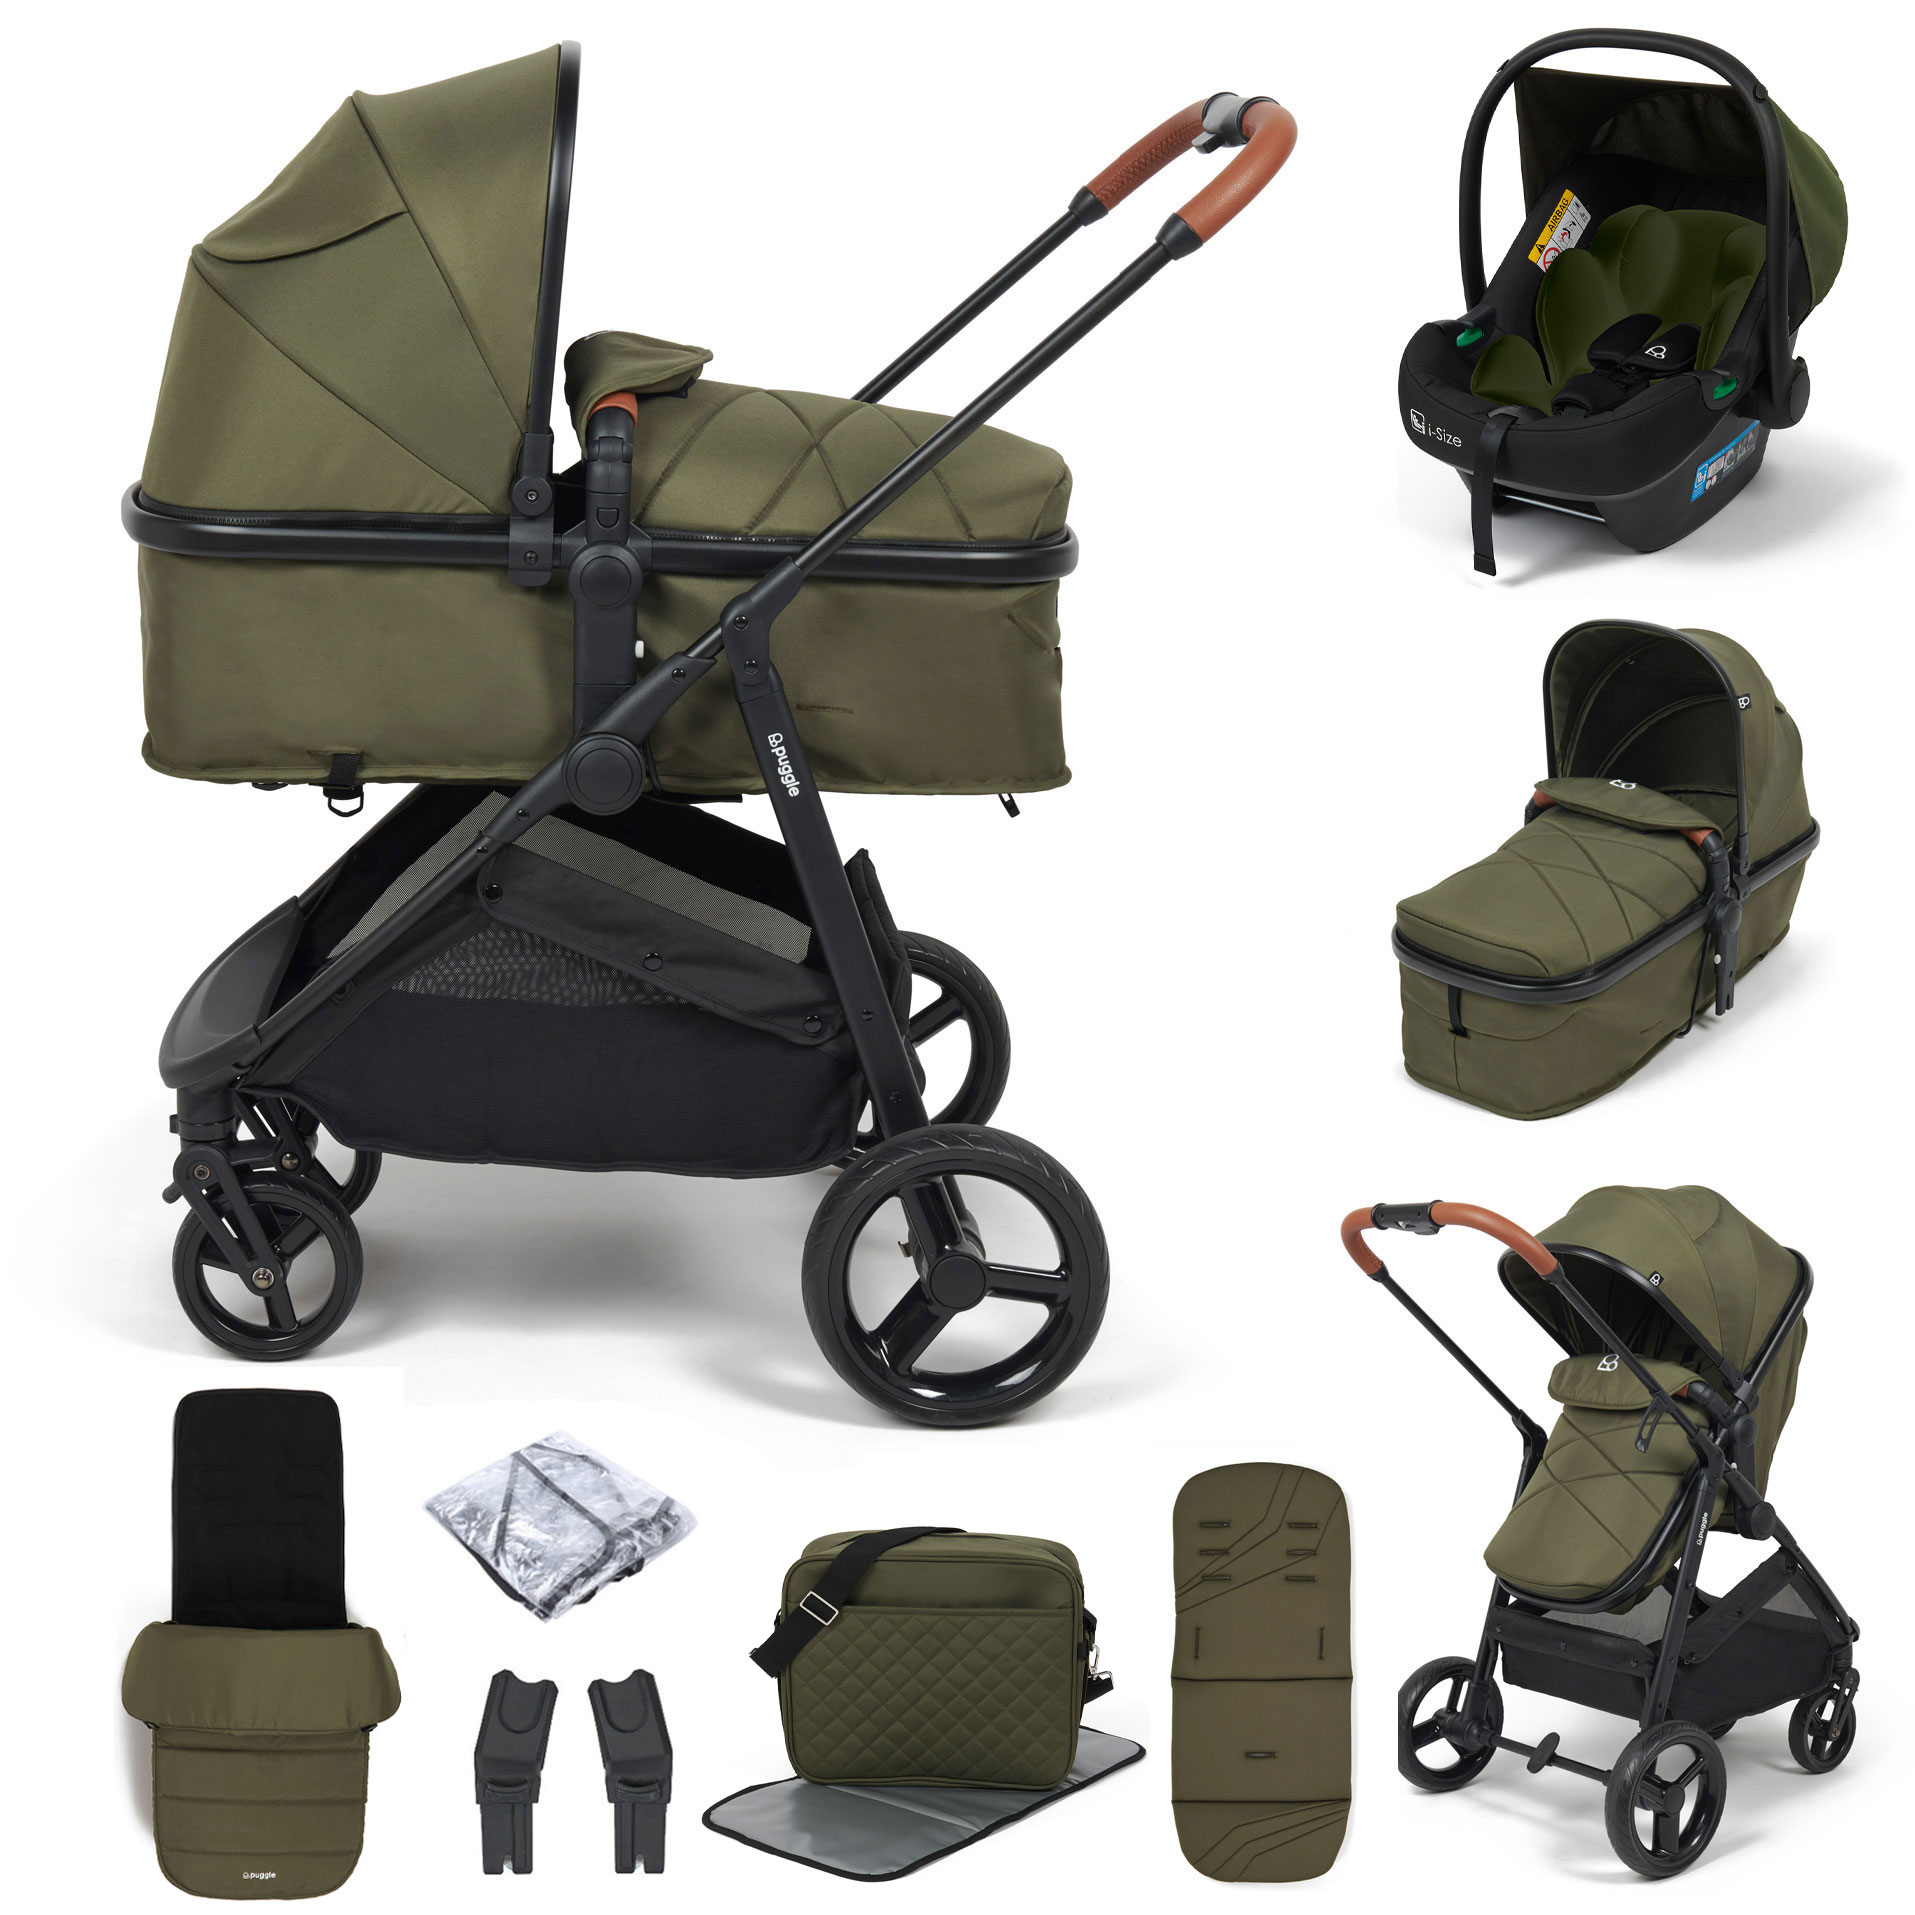 Puggle Monaco XT 2in1 i-Size Travel System with Footmuff & Changing Bag - Forest Green